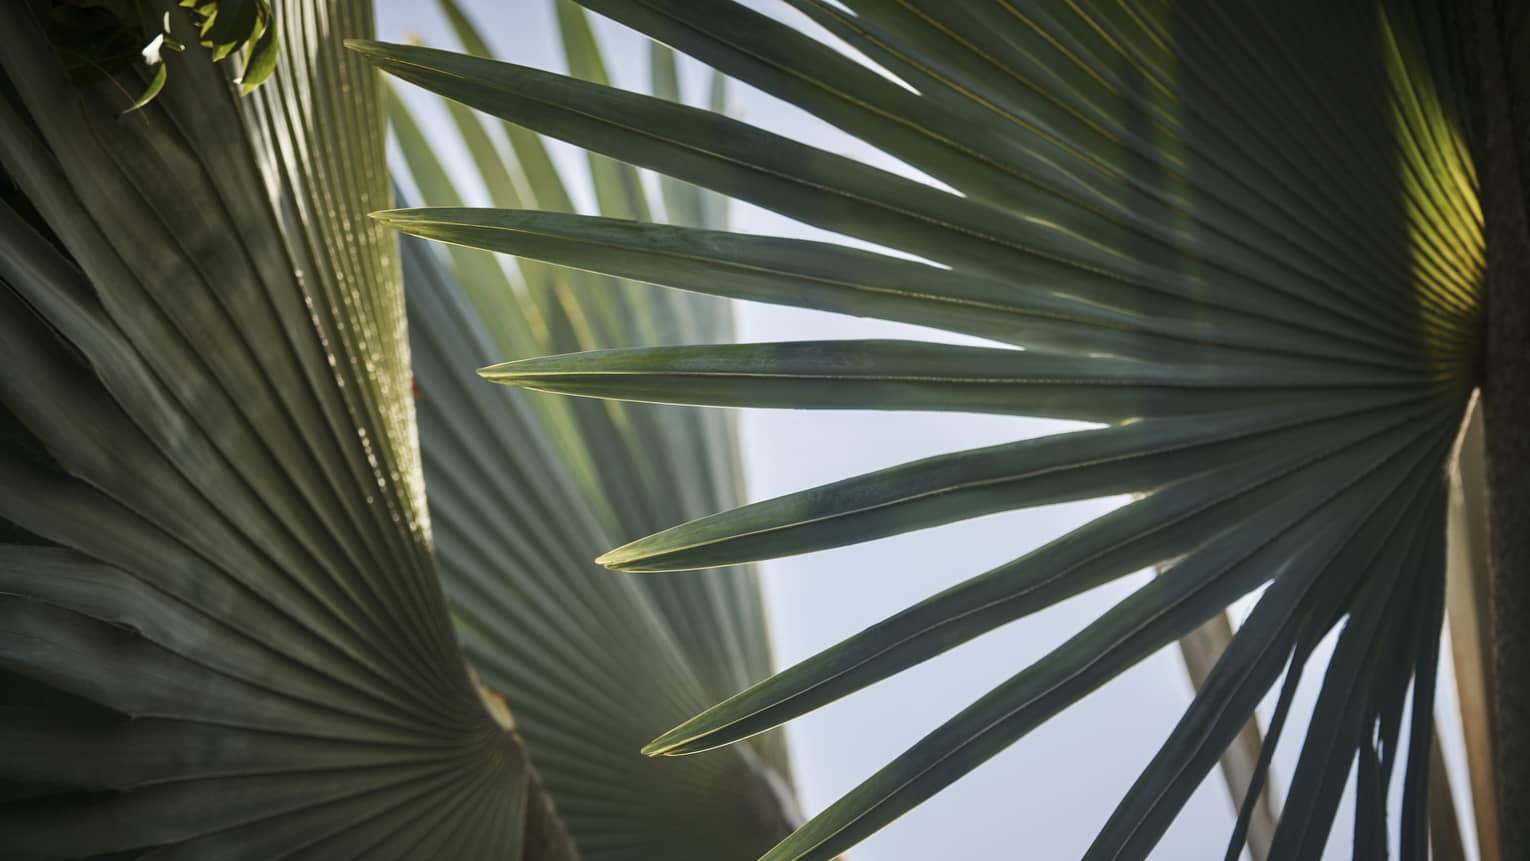 The leaves of a palm tree.